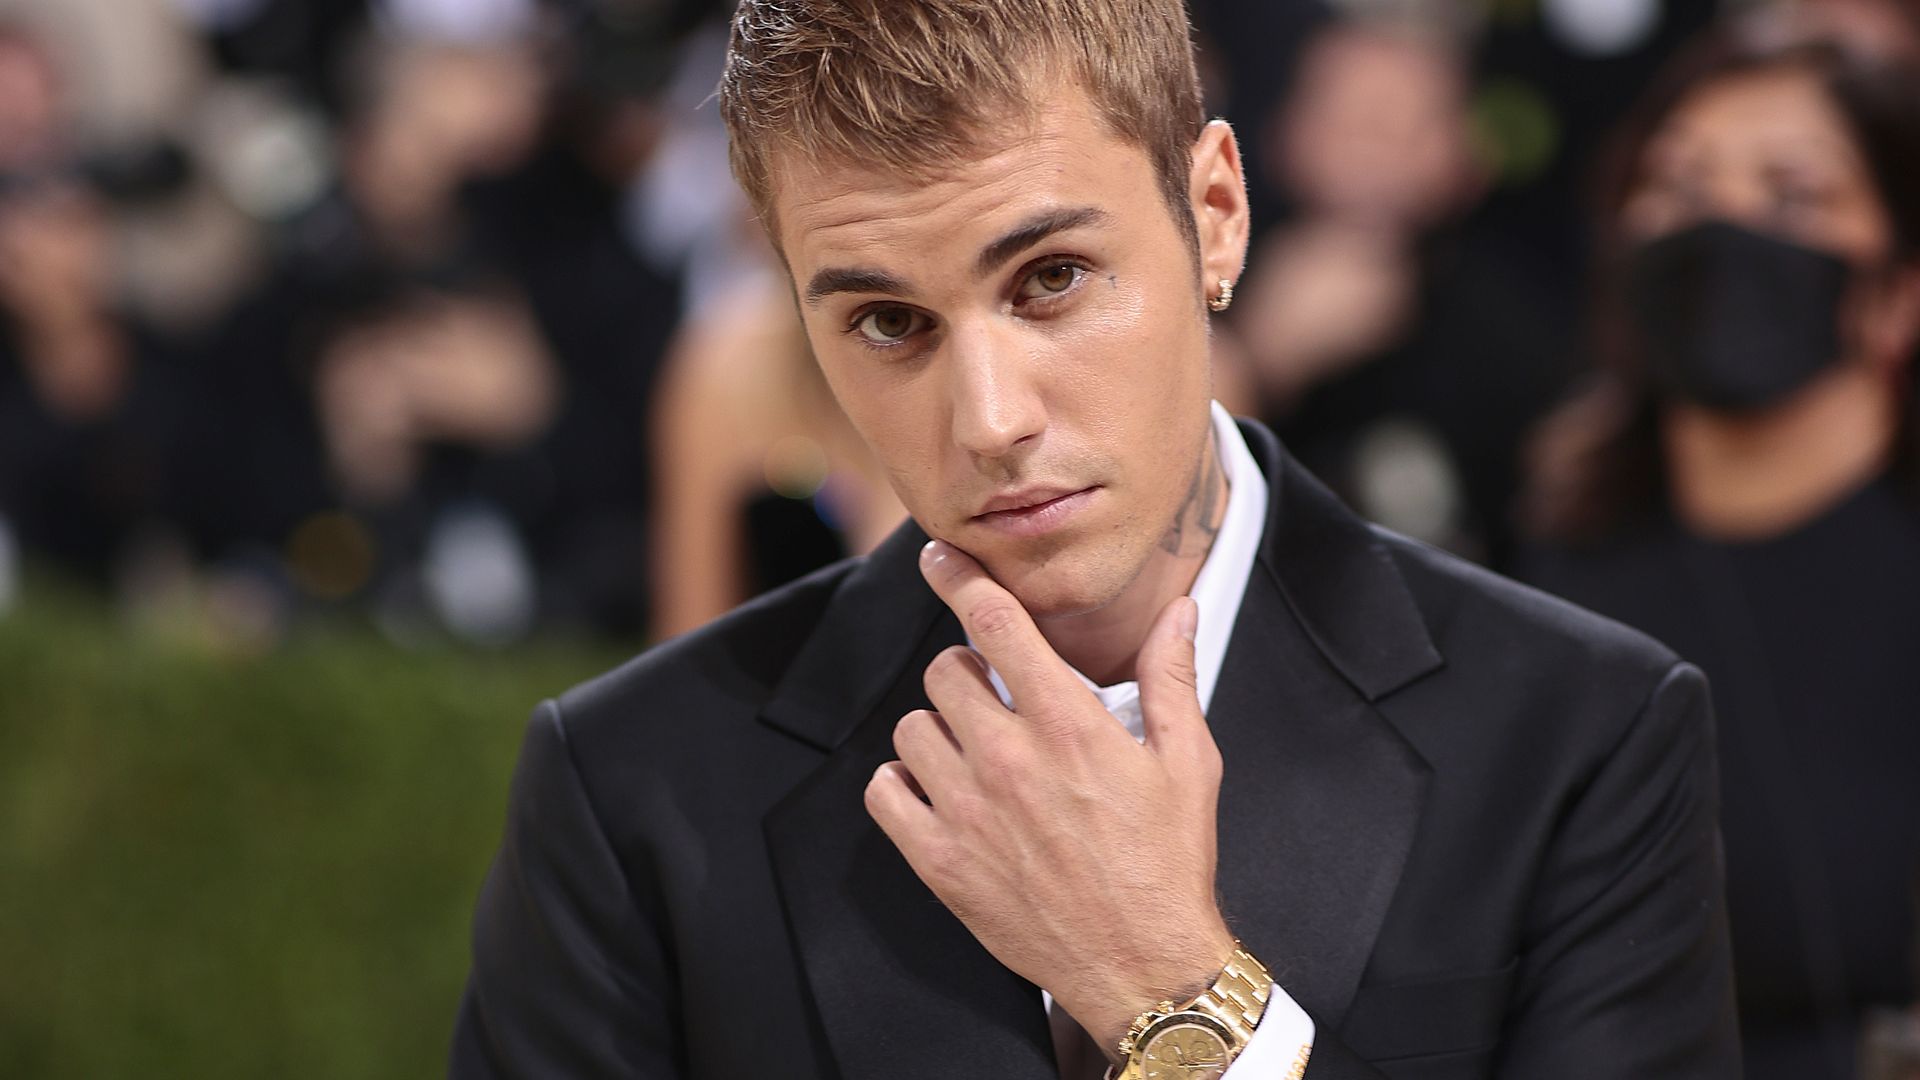 Justin Bieber attends The 2021 Met Gala Celebrating In America: A Lexicon Of Fashion at Metropolitan Museum of Art on September 13, 2021 in New York City. 